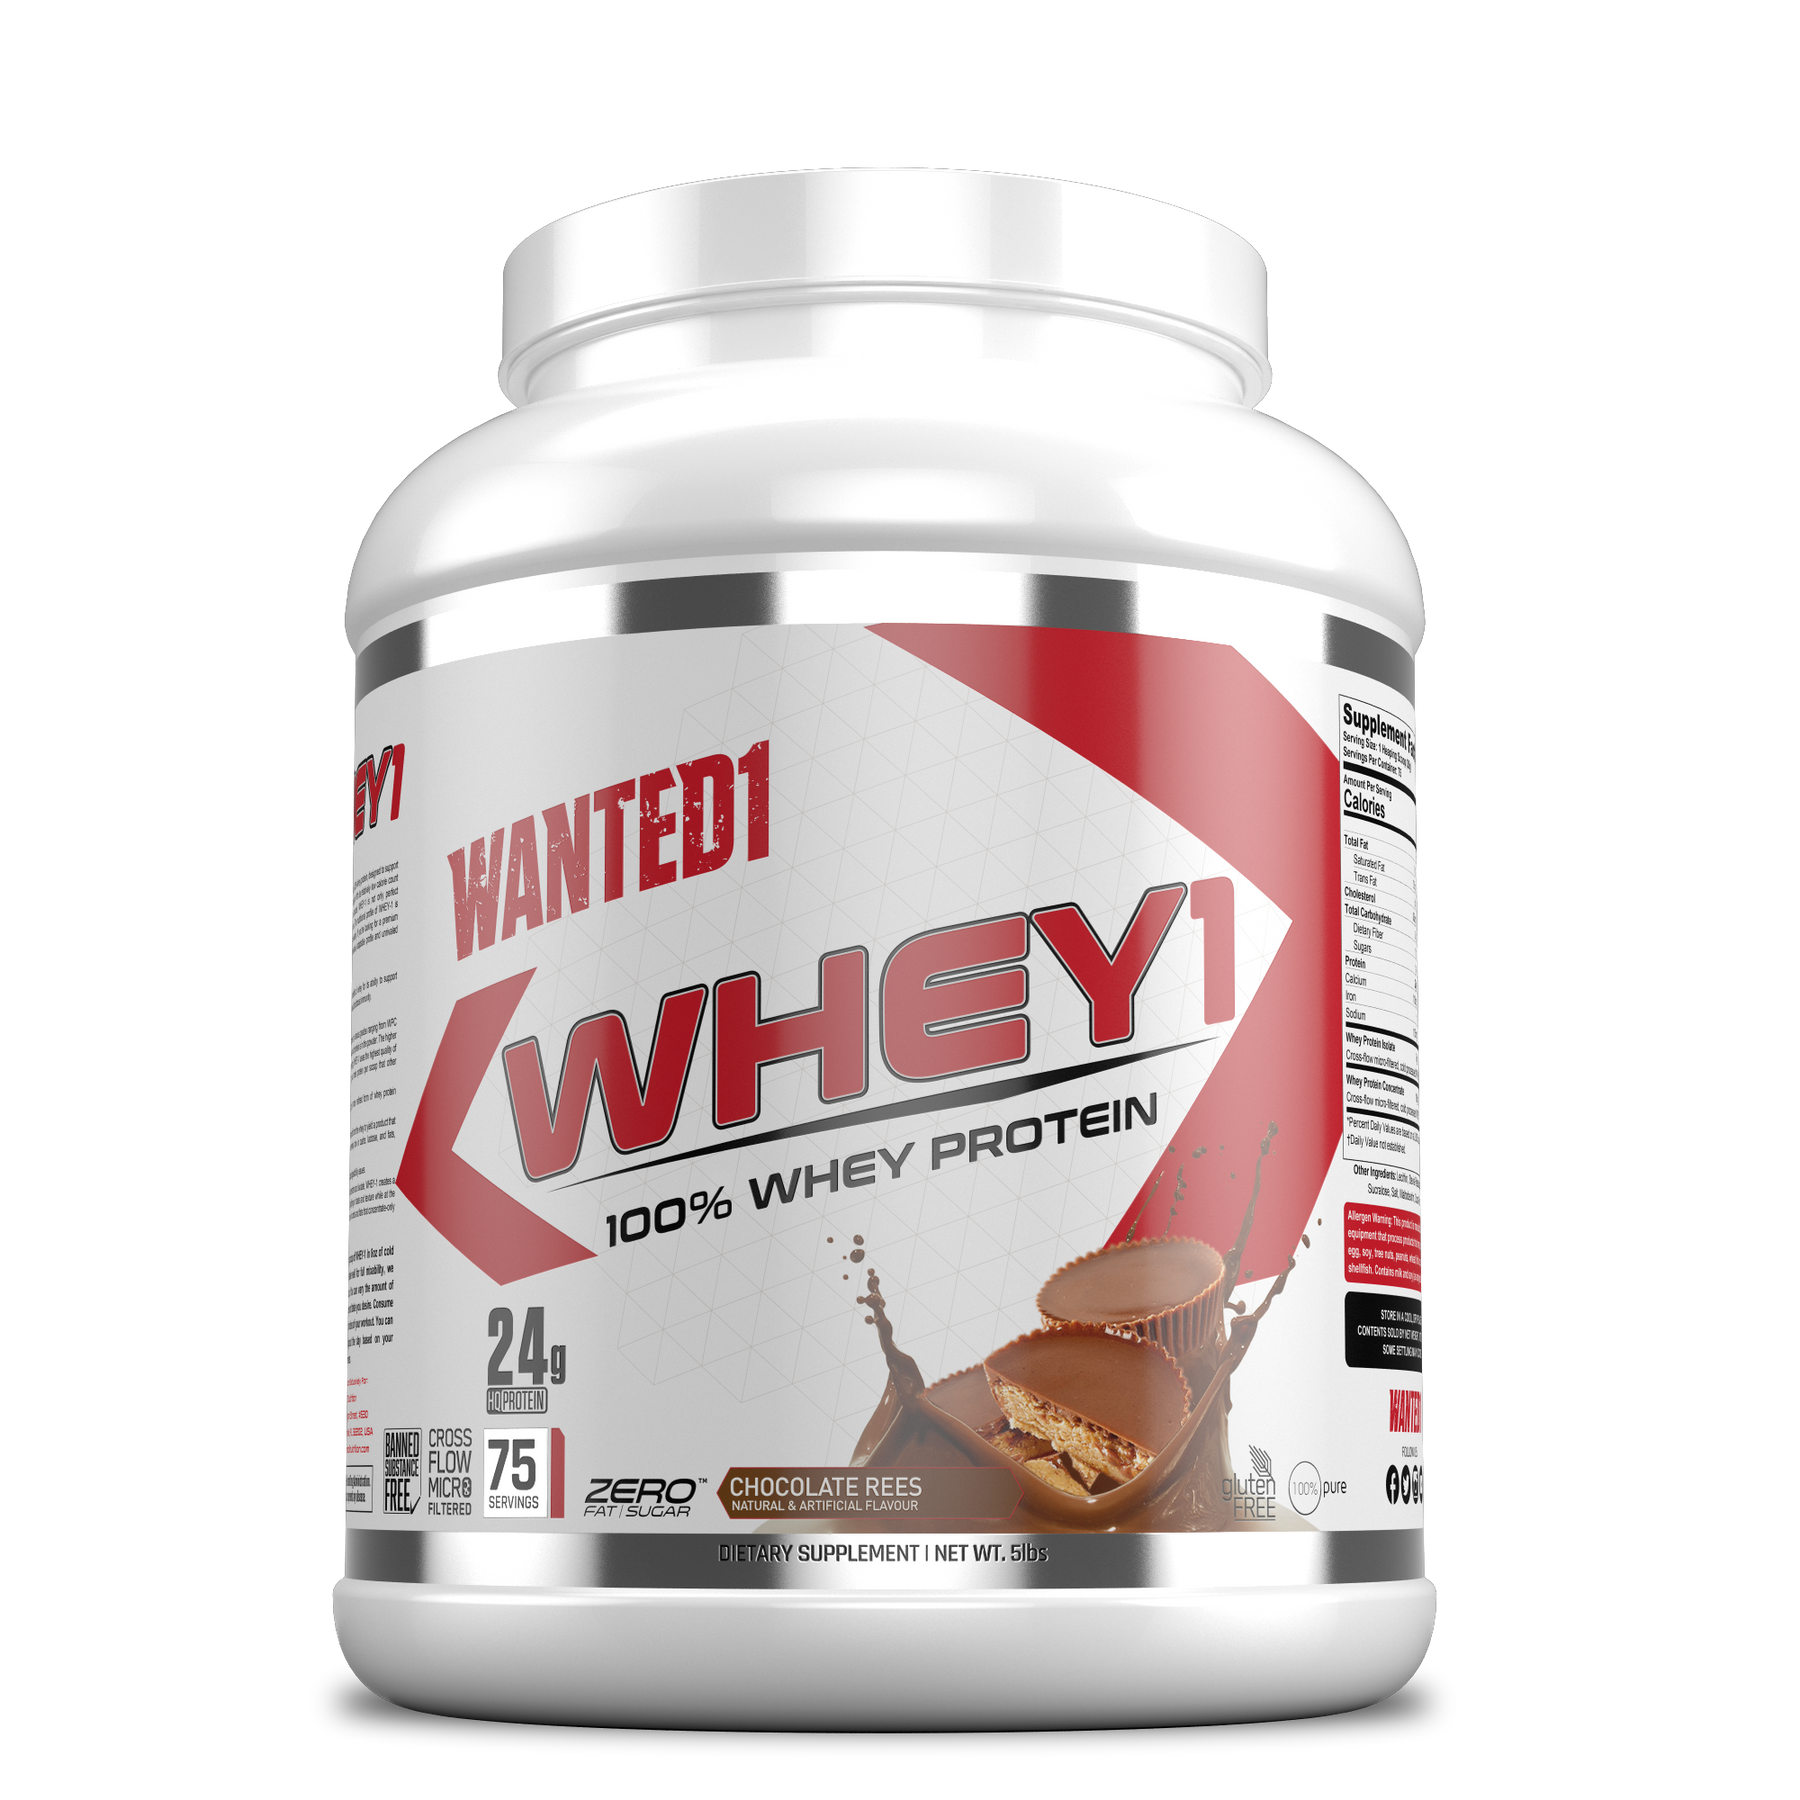 Wanted1 Whey1 -100% Whey Protein - 5lbs